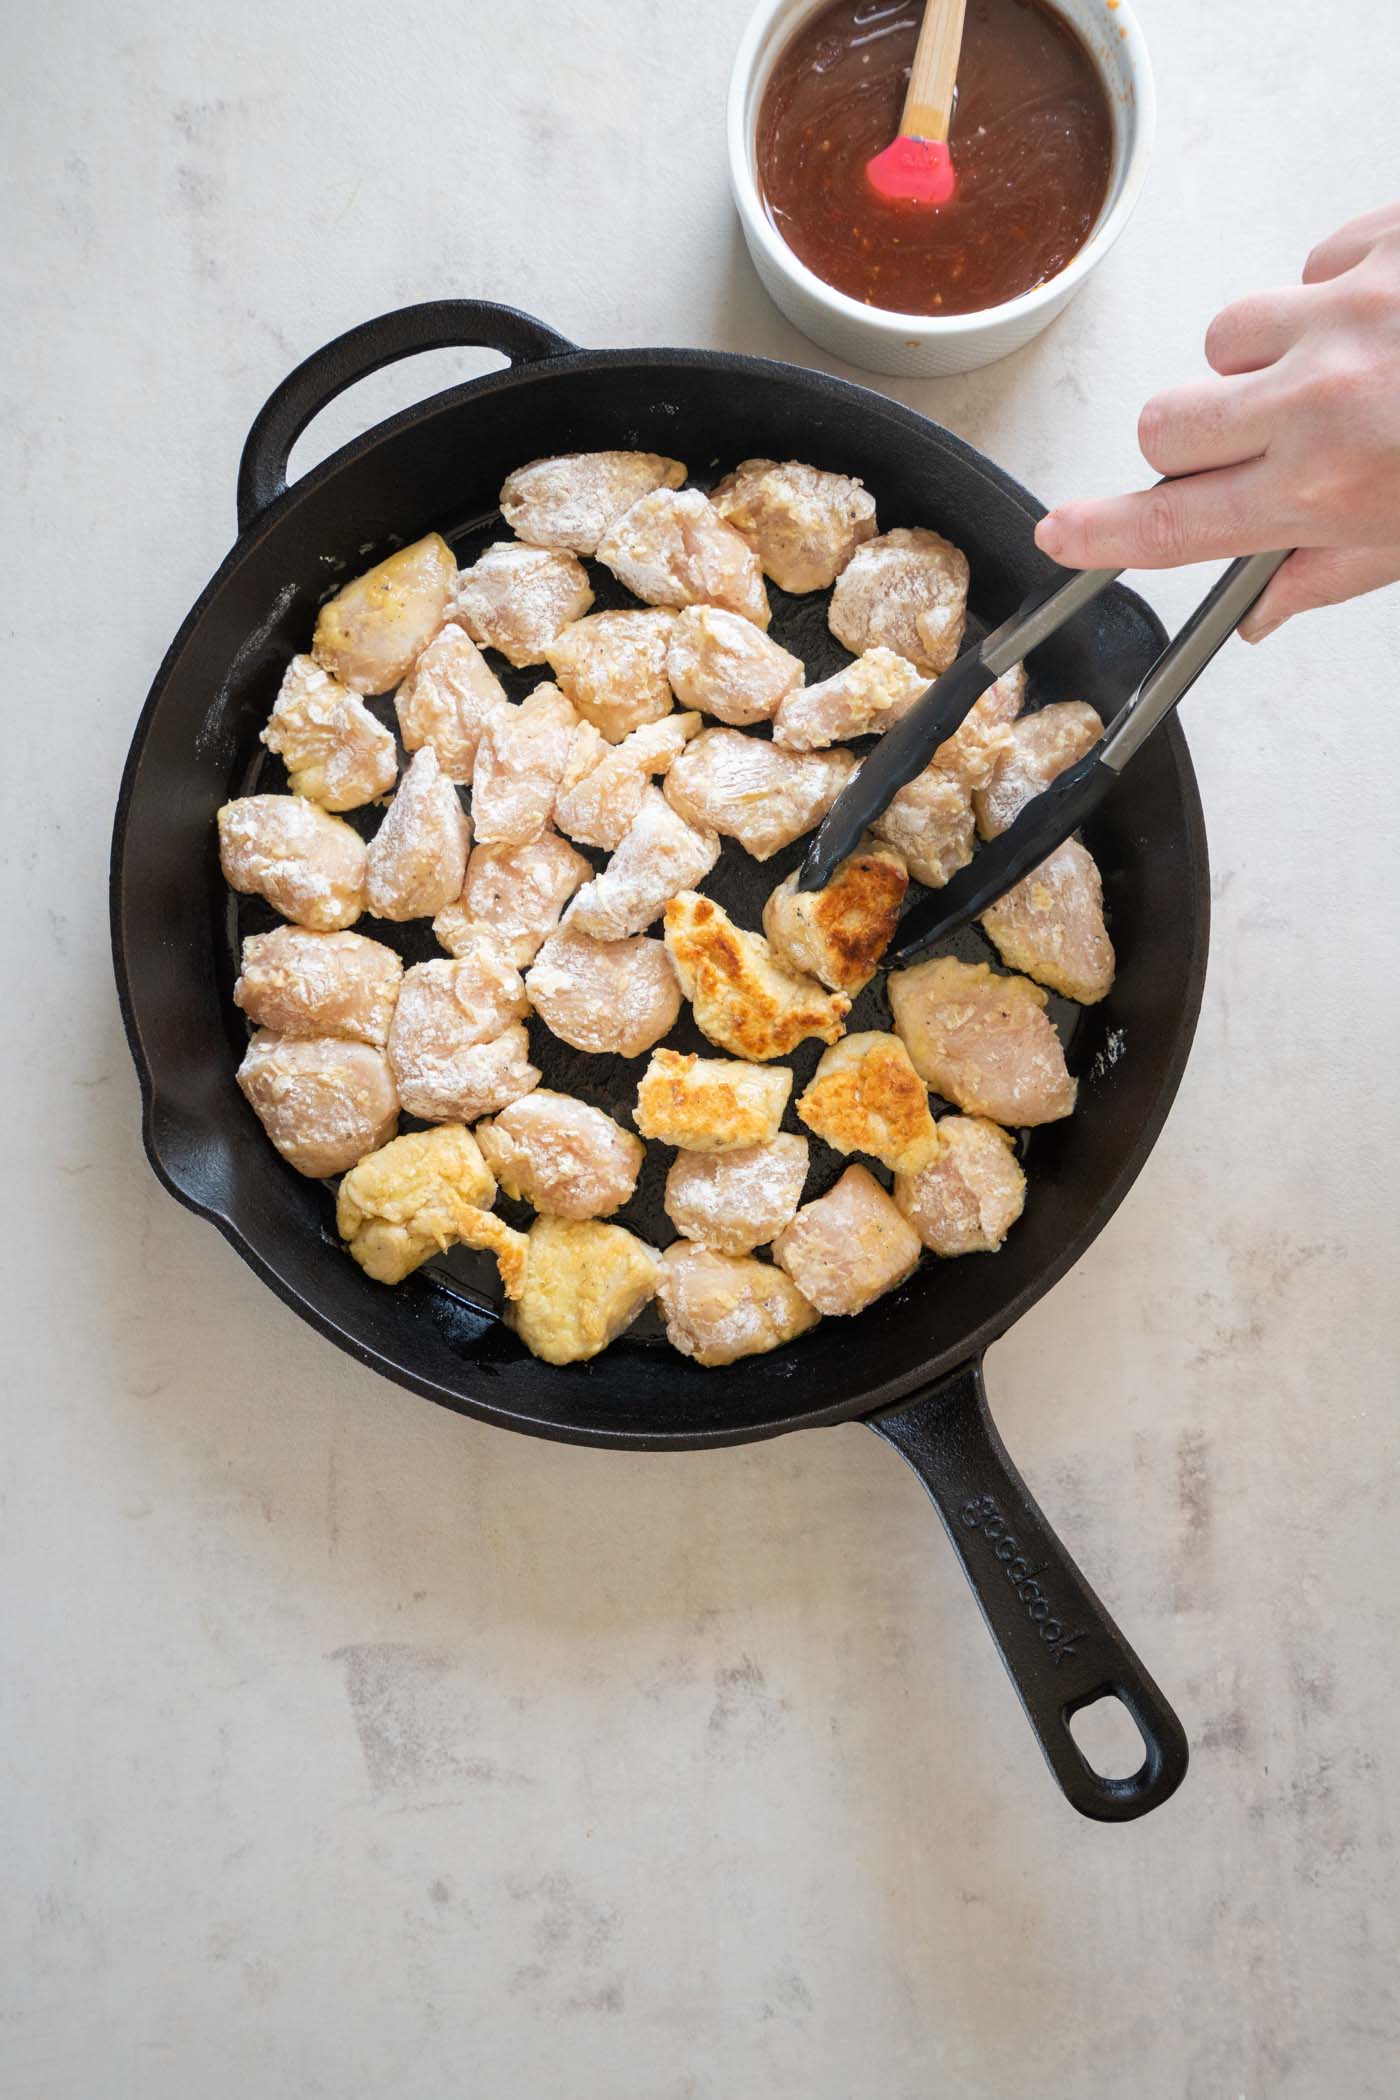 Browning chicken pieces in a cast iron skillet.